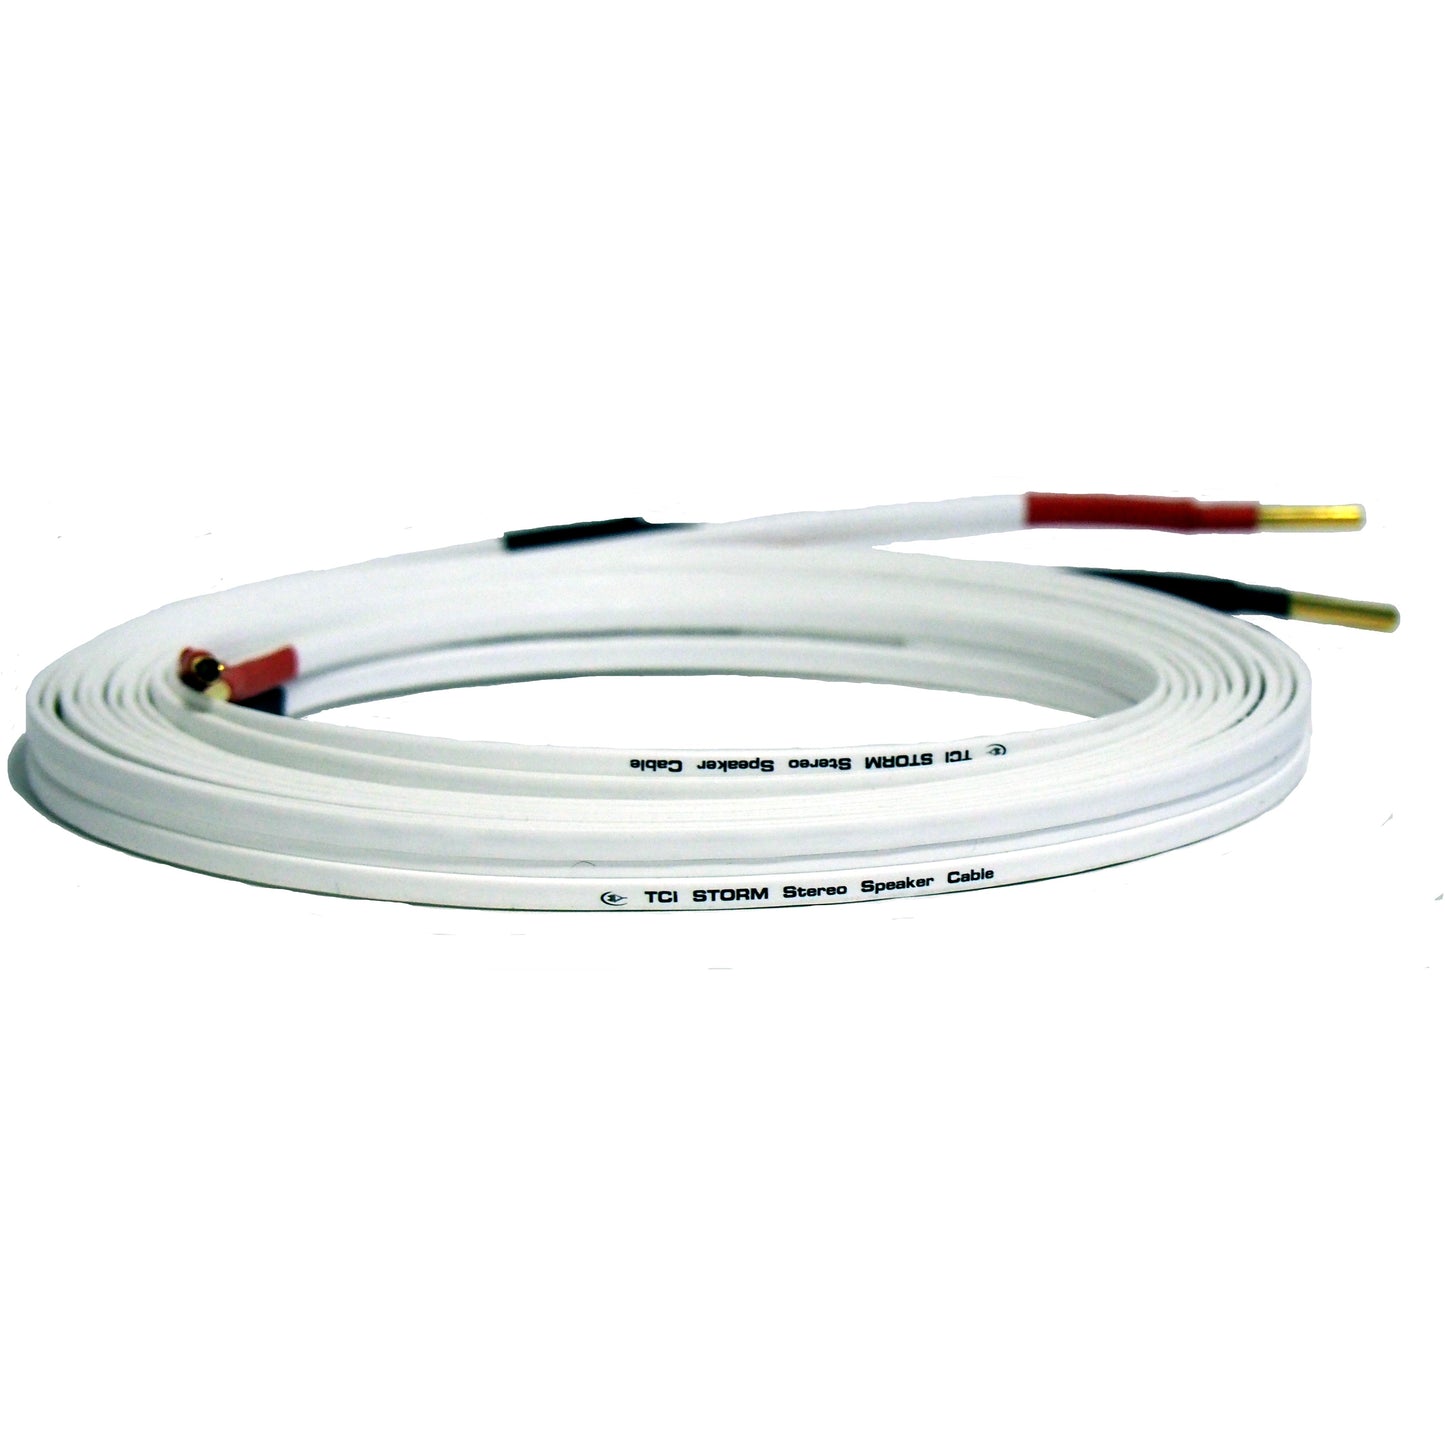 True Colours (TCI) Storm Stereo Speaker Cable